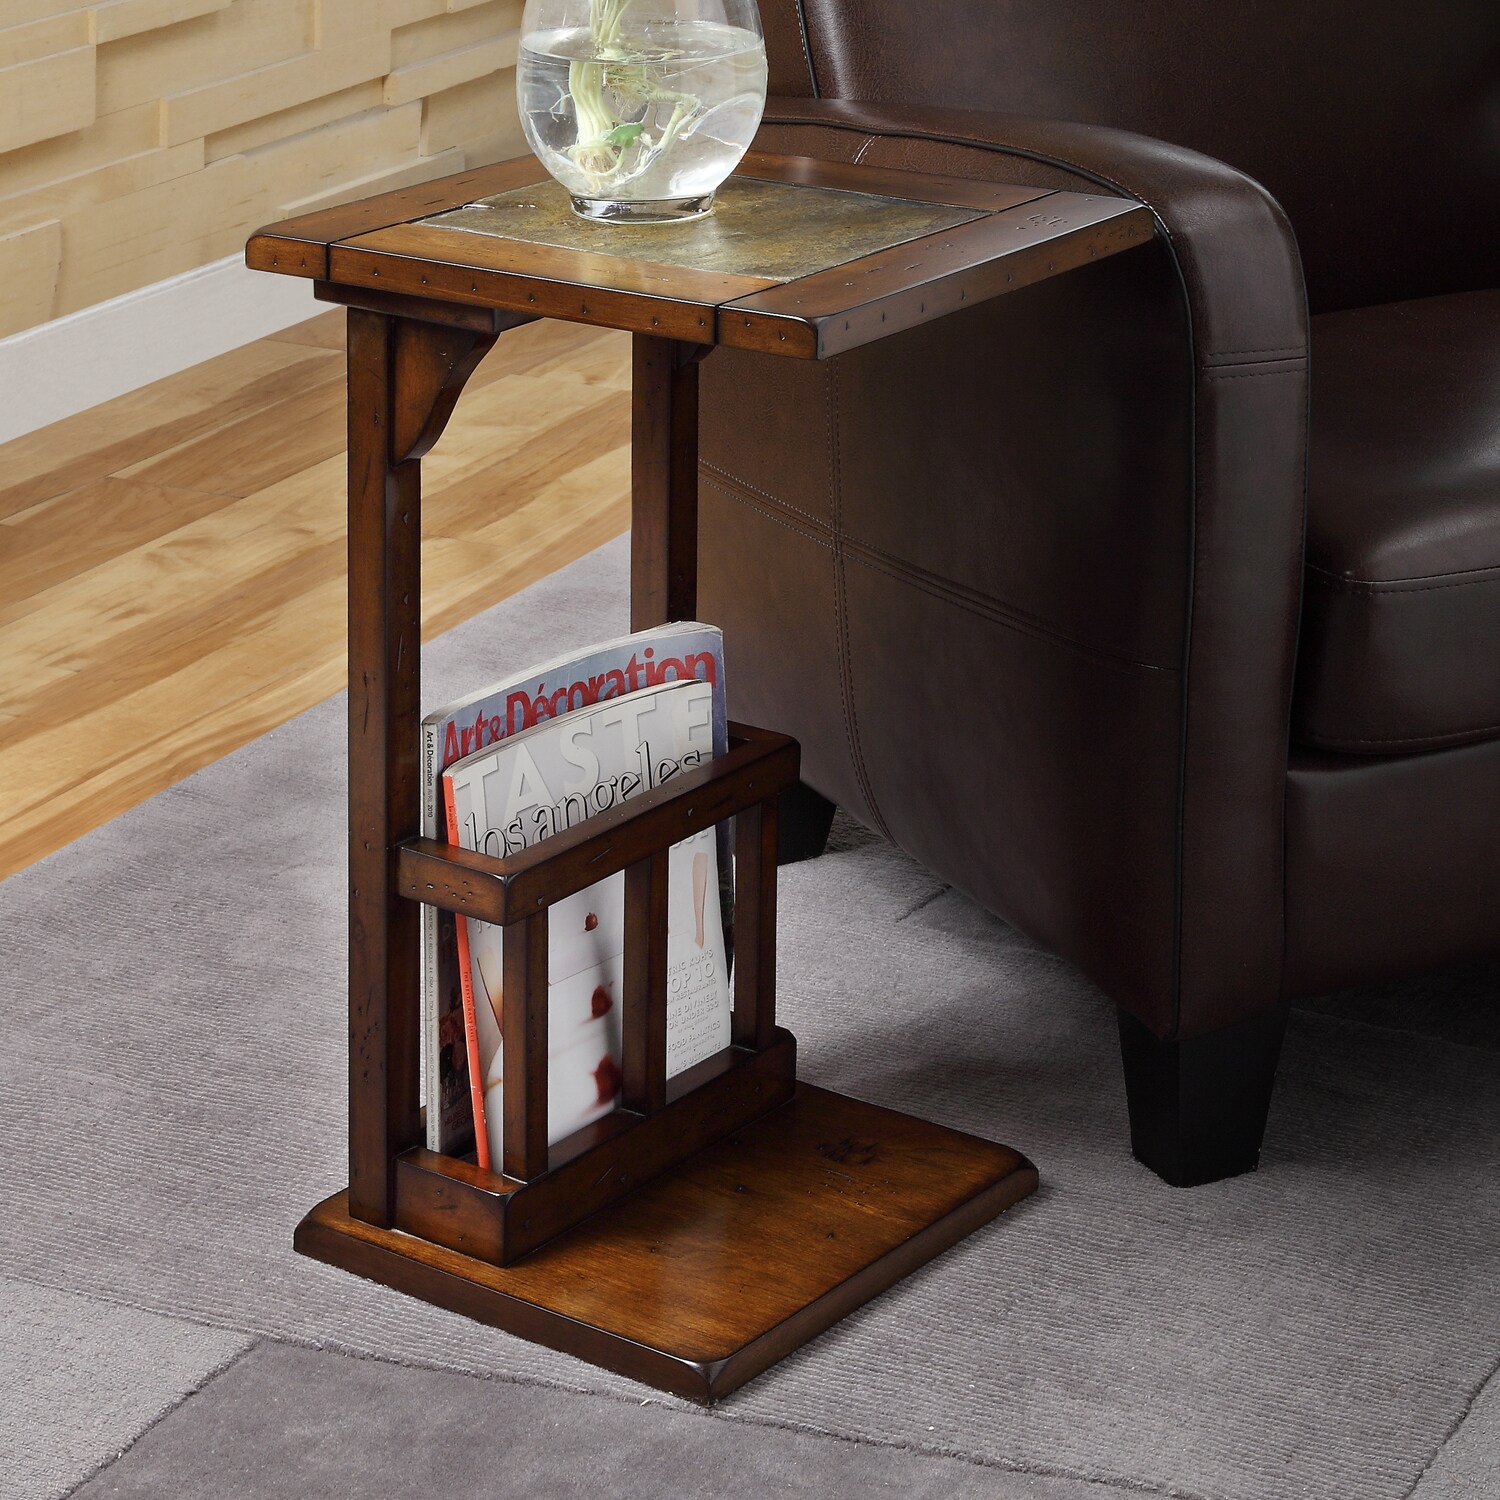 St Ives Dark Oak Chairside Table - Free Shipping Today - Overstock.com